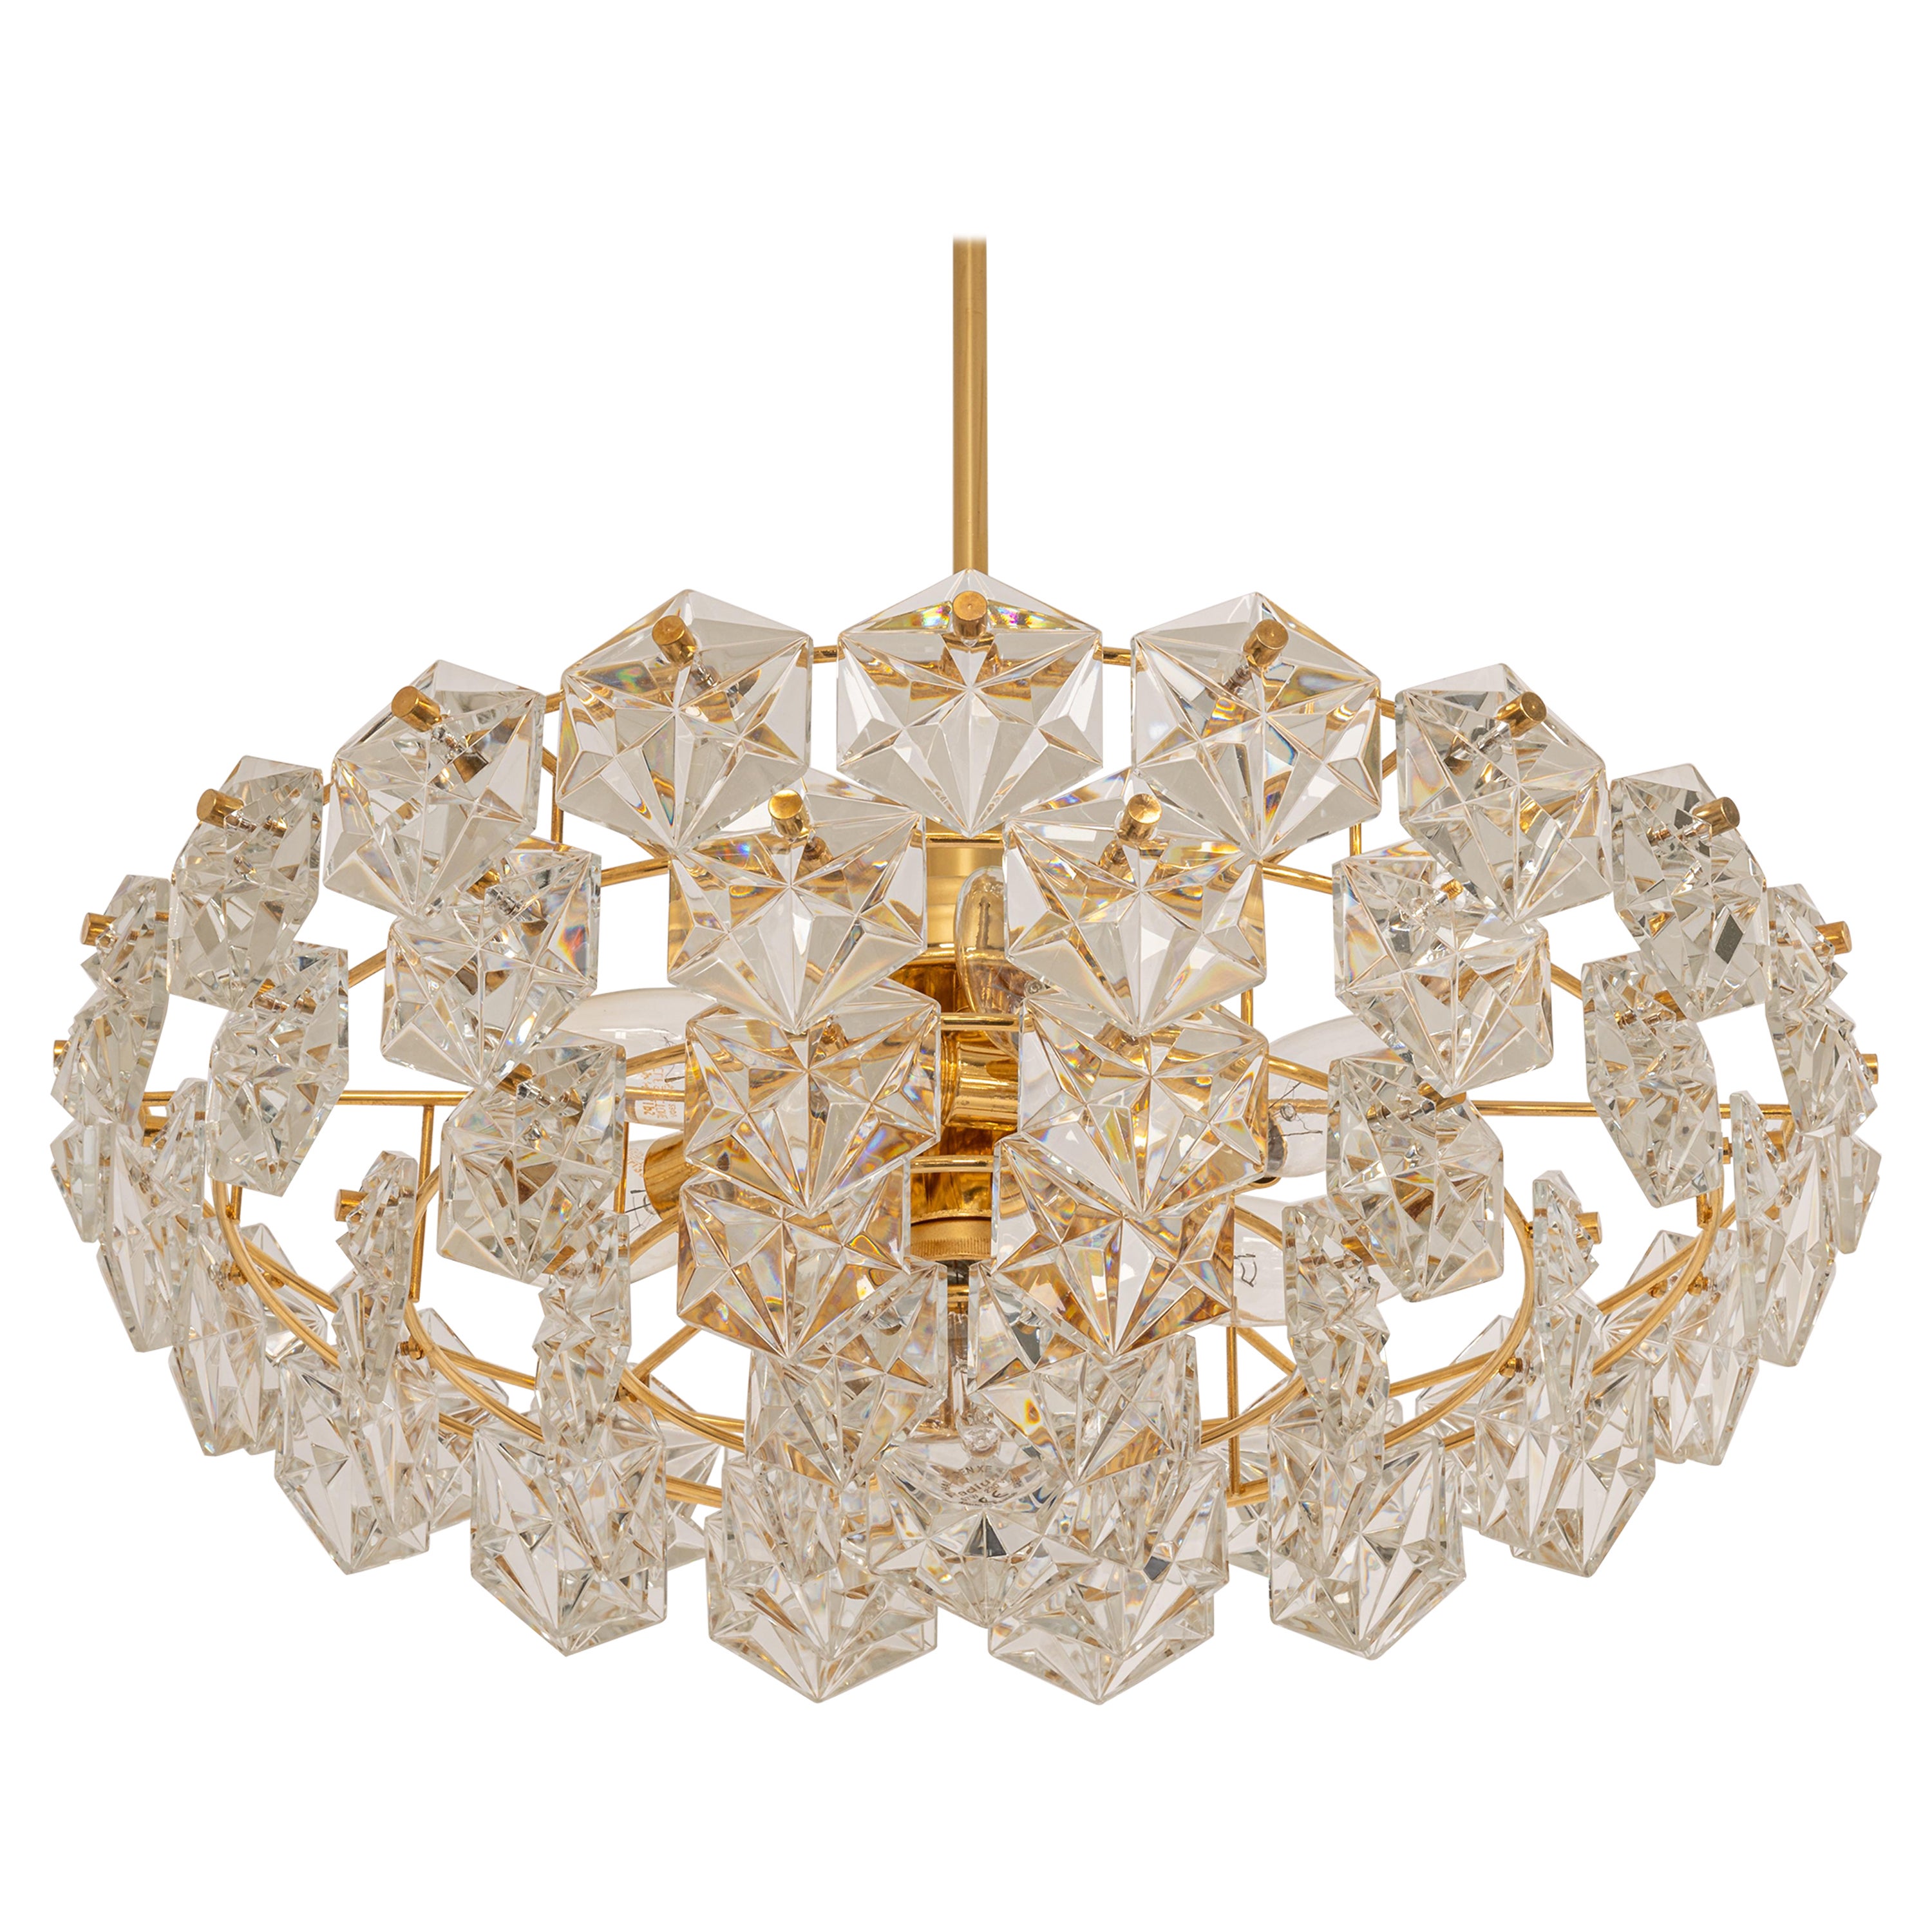 Stunning Large Chandelier, Brass and Crystal Glass by Kinkeldey, Germany, 1970s For Sale